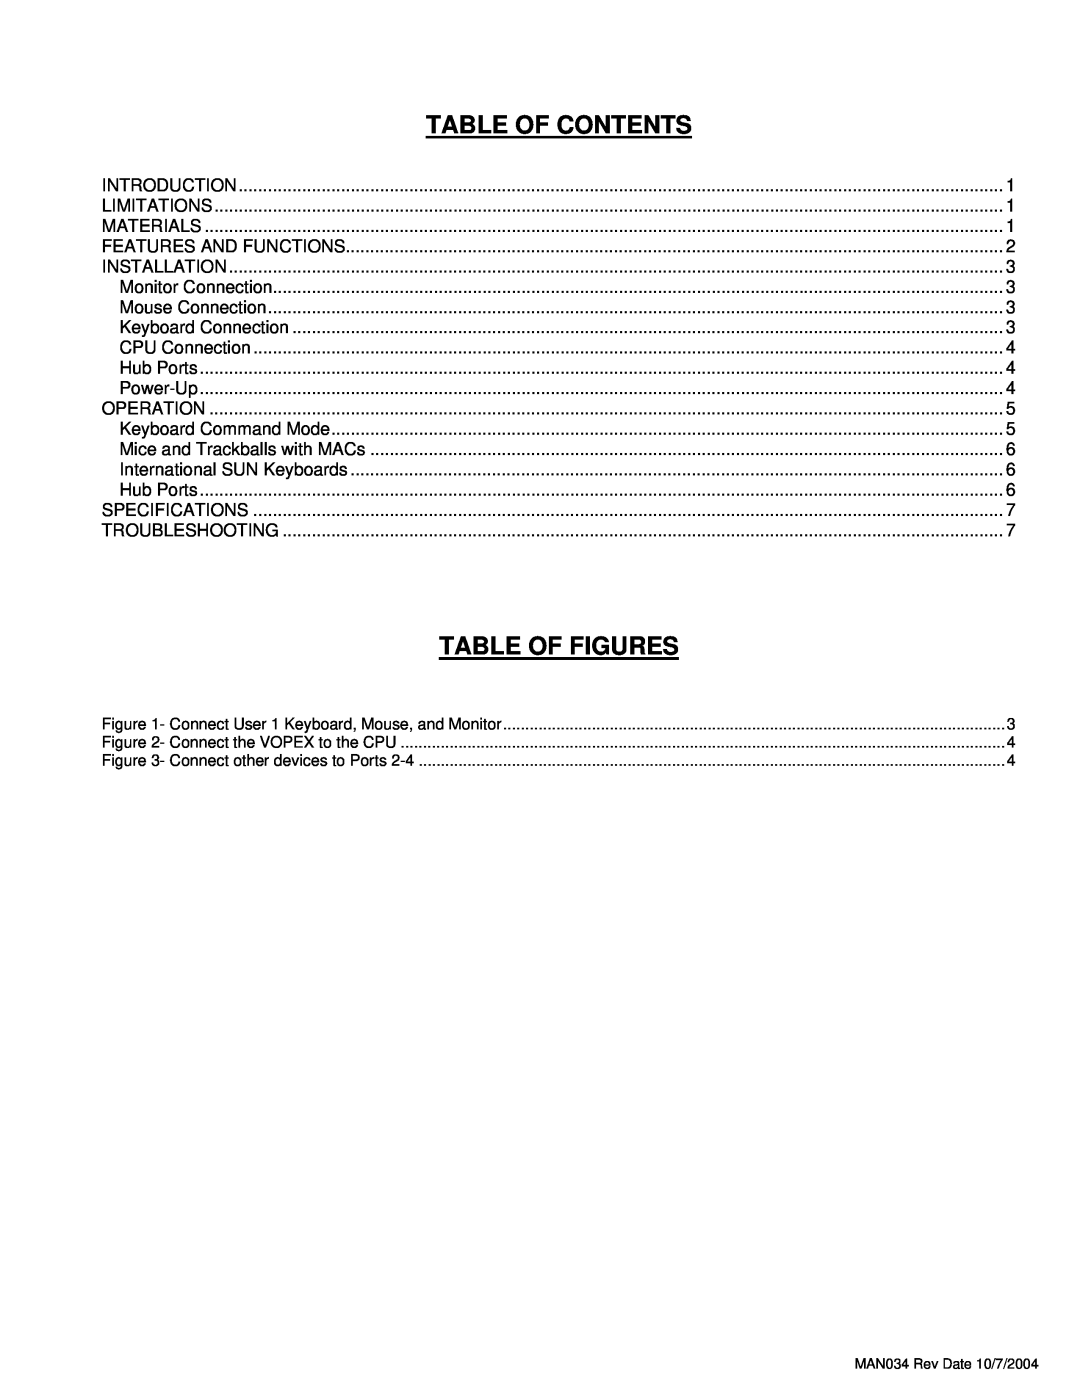 Network Technologies VOPEX-USBV operation manual Table Of Figures, Table Of Contents, MAN034 Rev Date 10/7/2004 